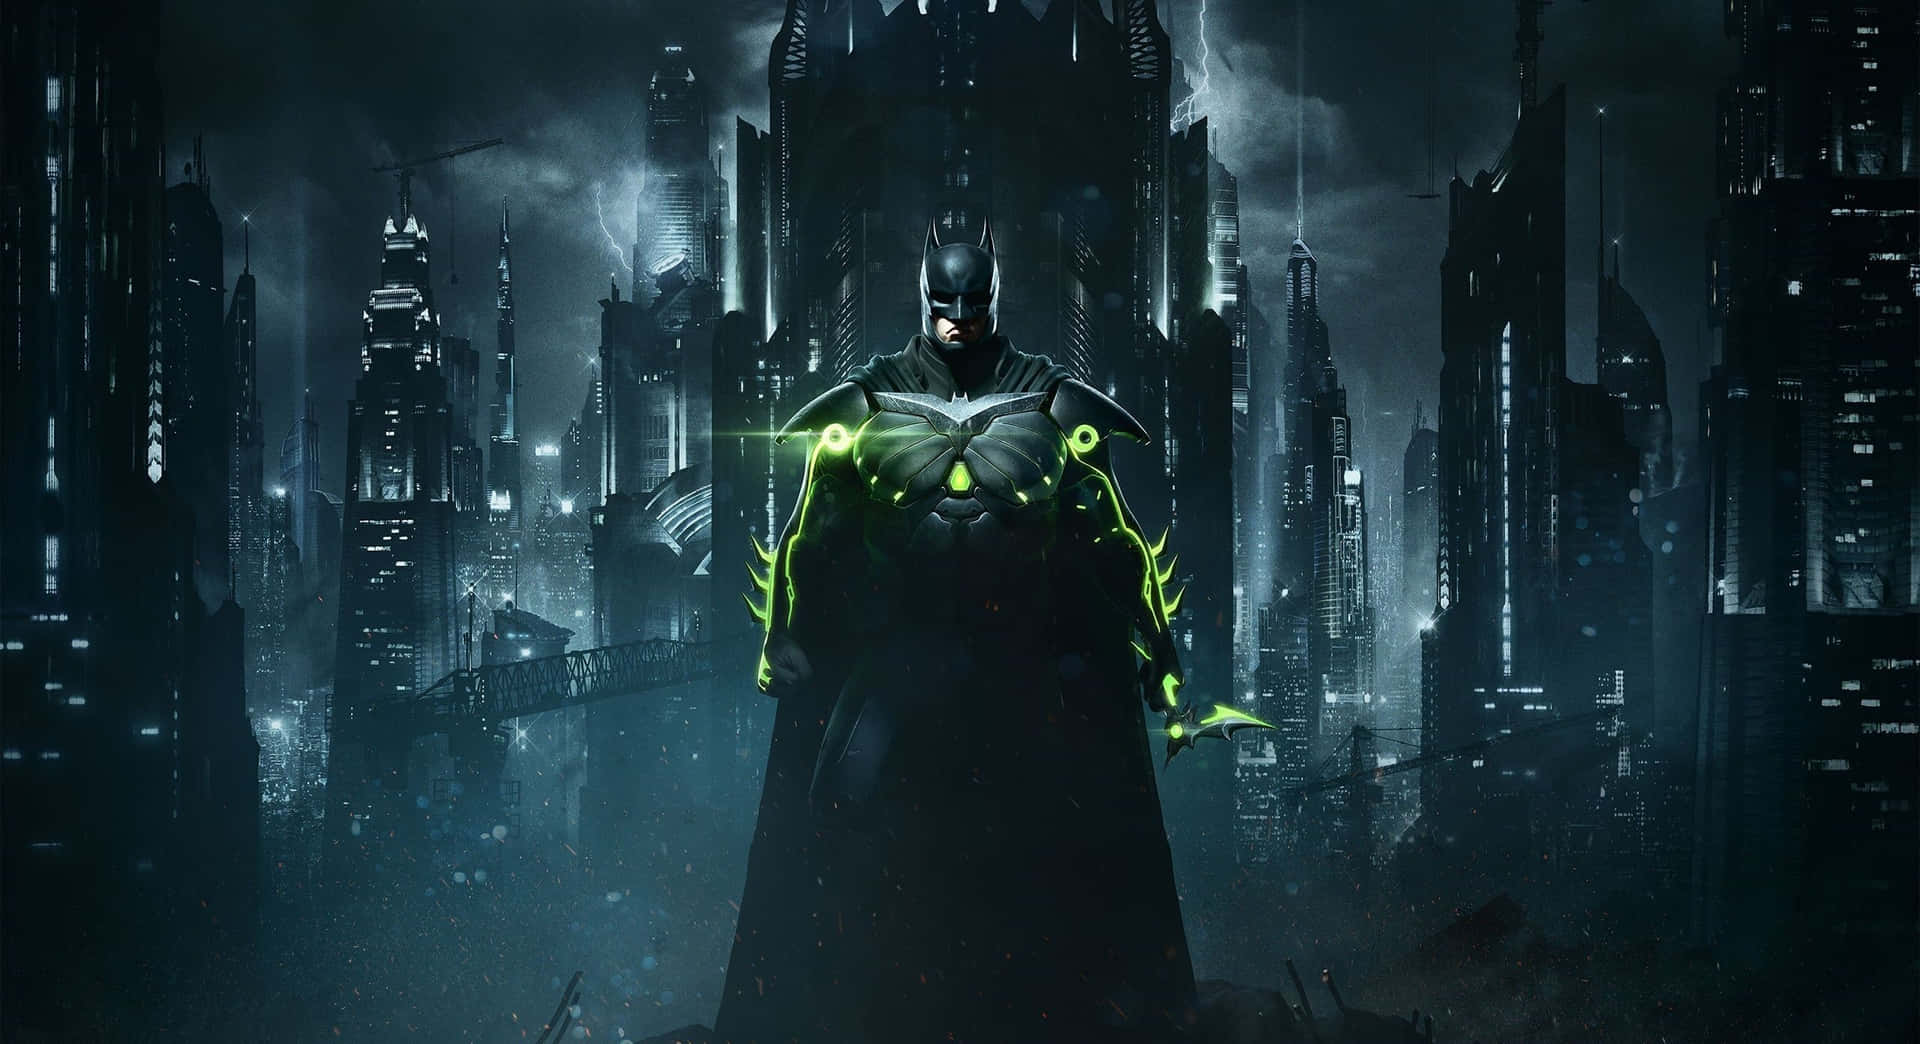 Gothamcity's Dark Knight Could Be Translated To 